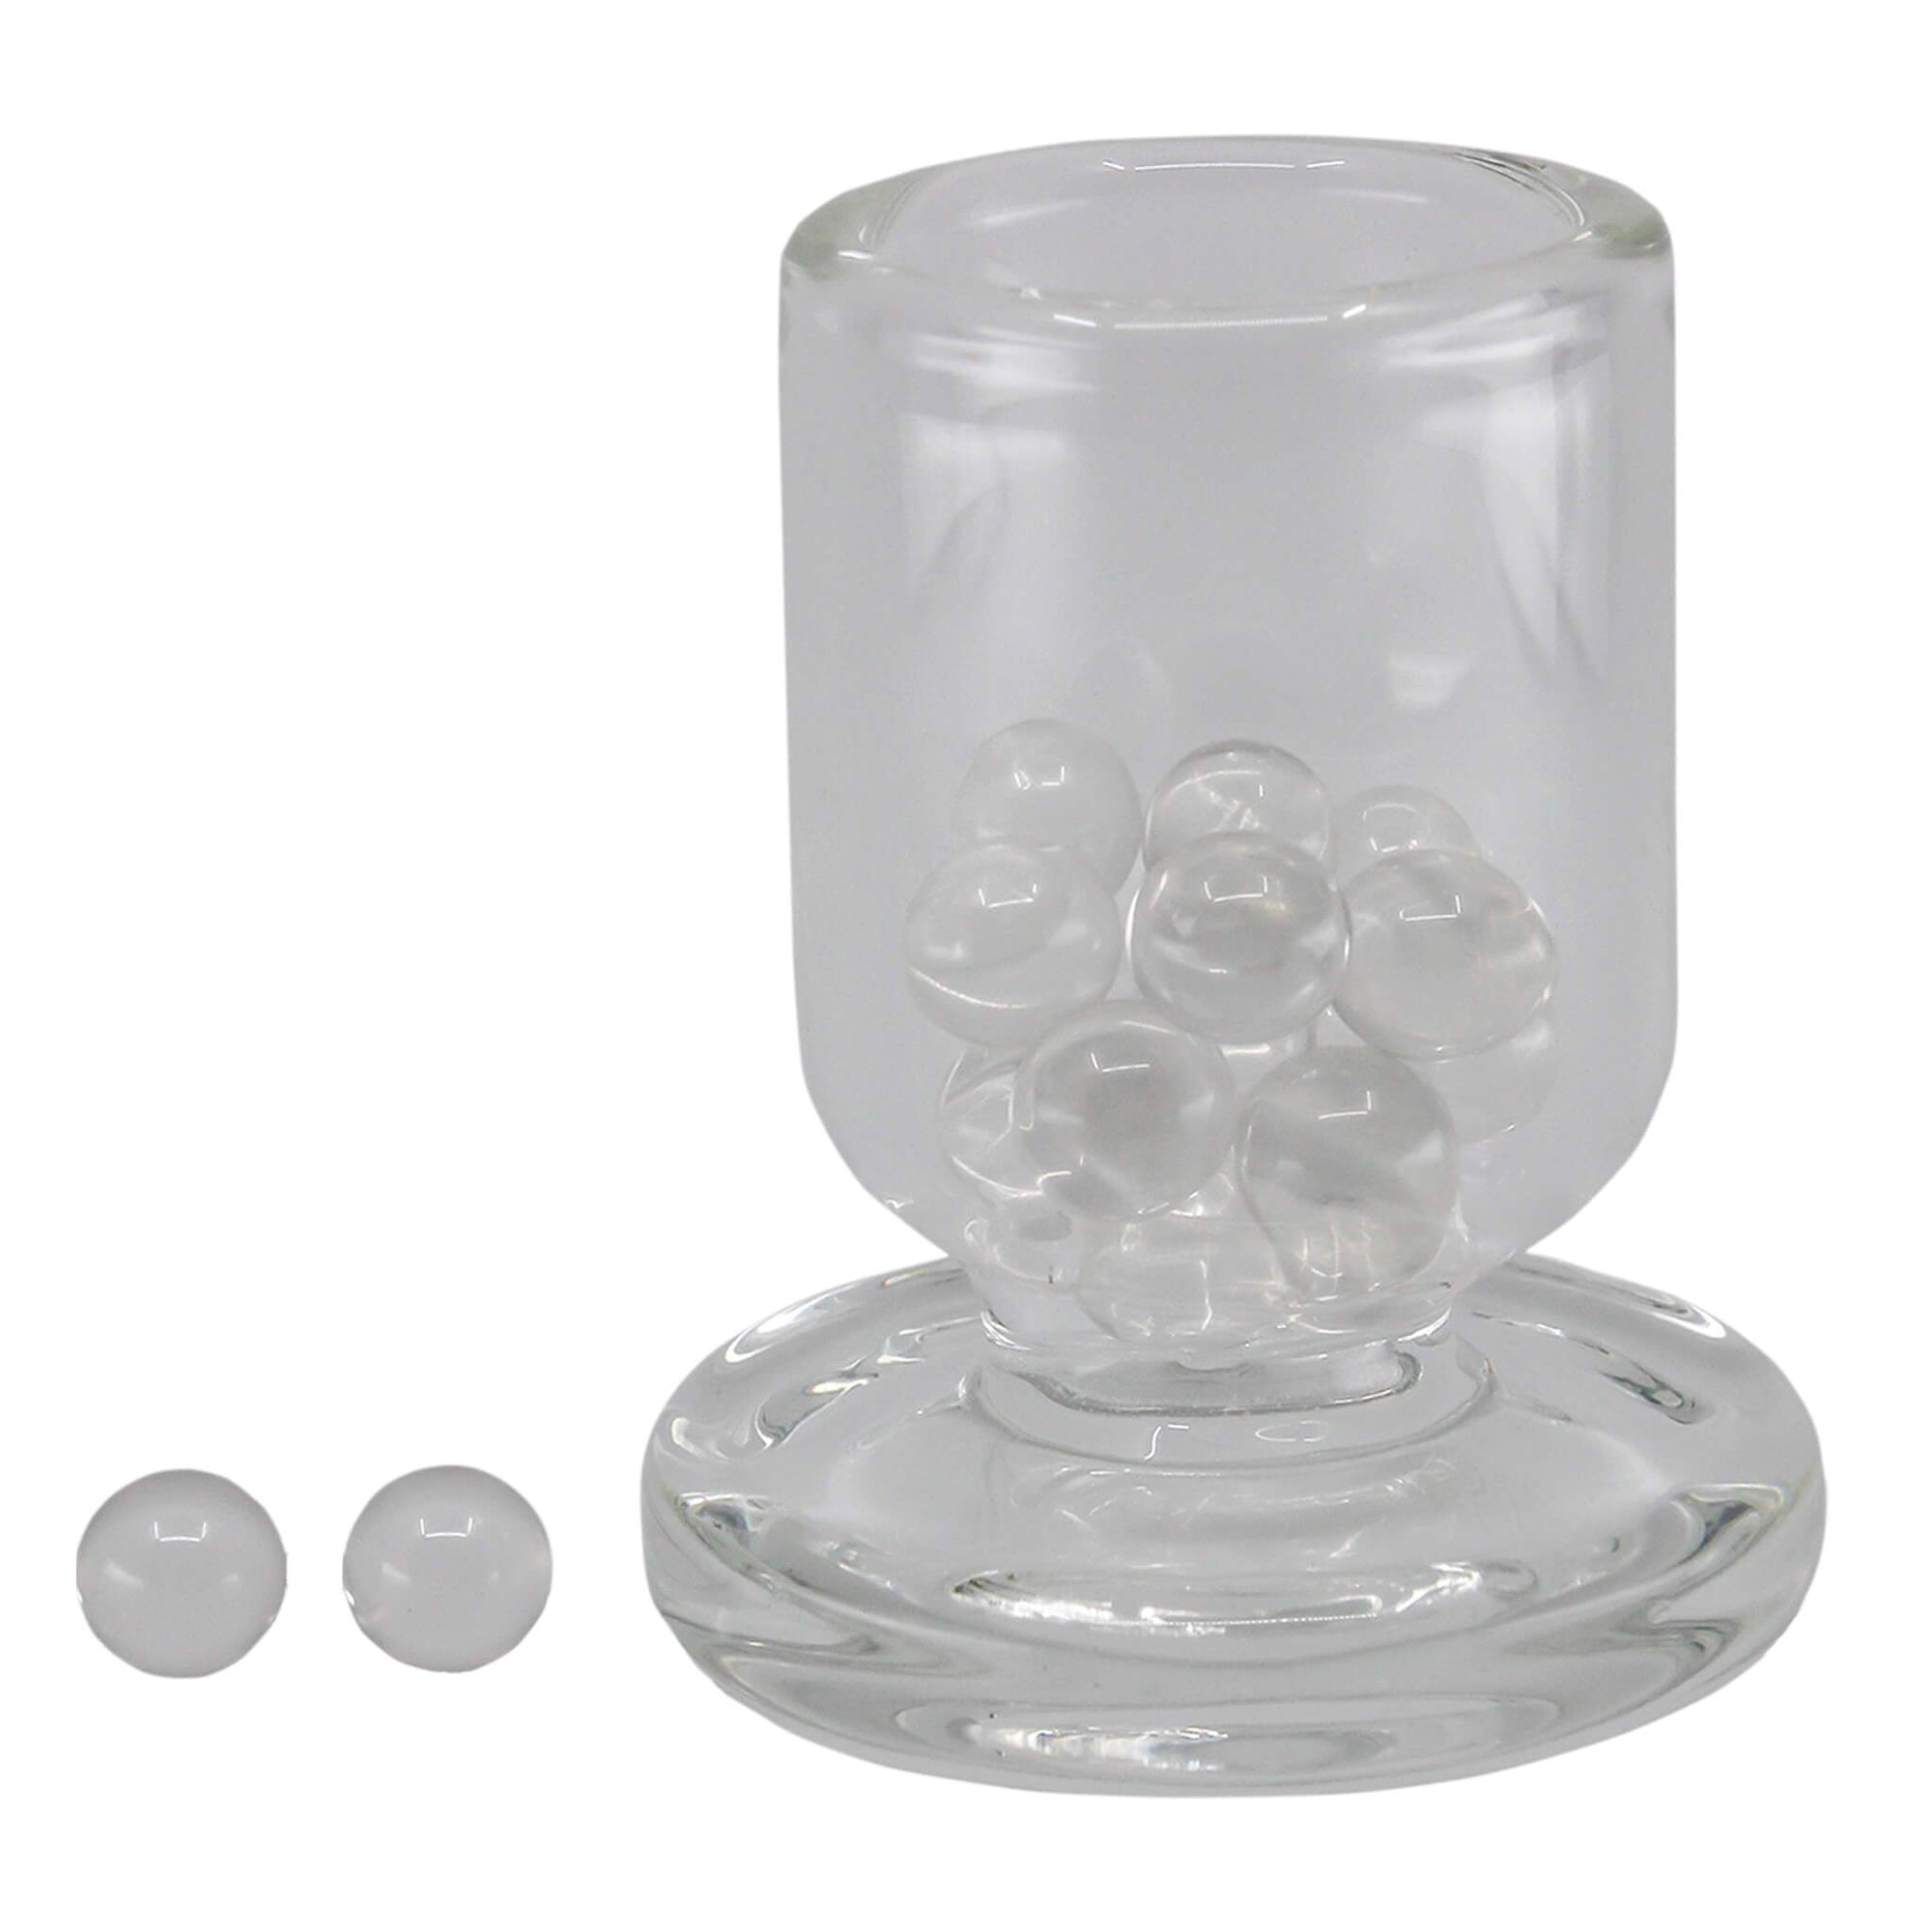 Tiny Hand Dab Rig Complete Kit #3 | A Cup Full Of Quartz Terp Pearls View | the dabbing specialists